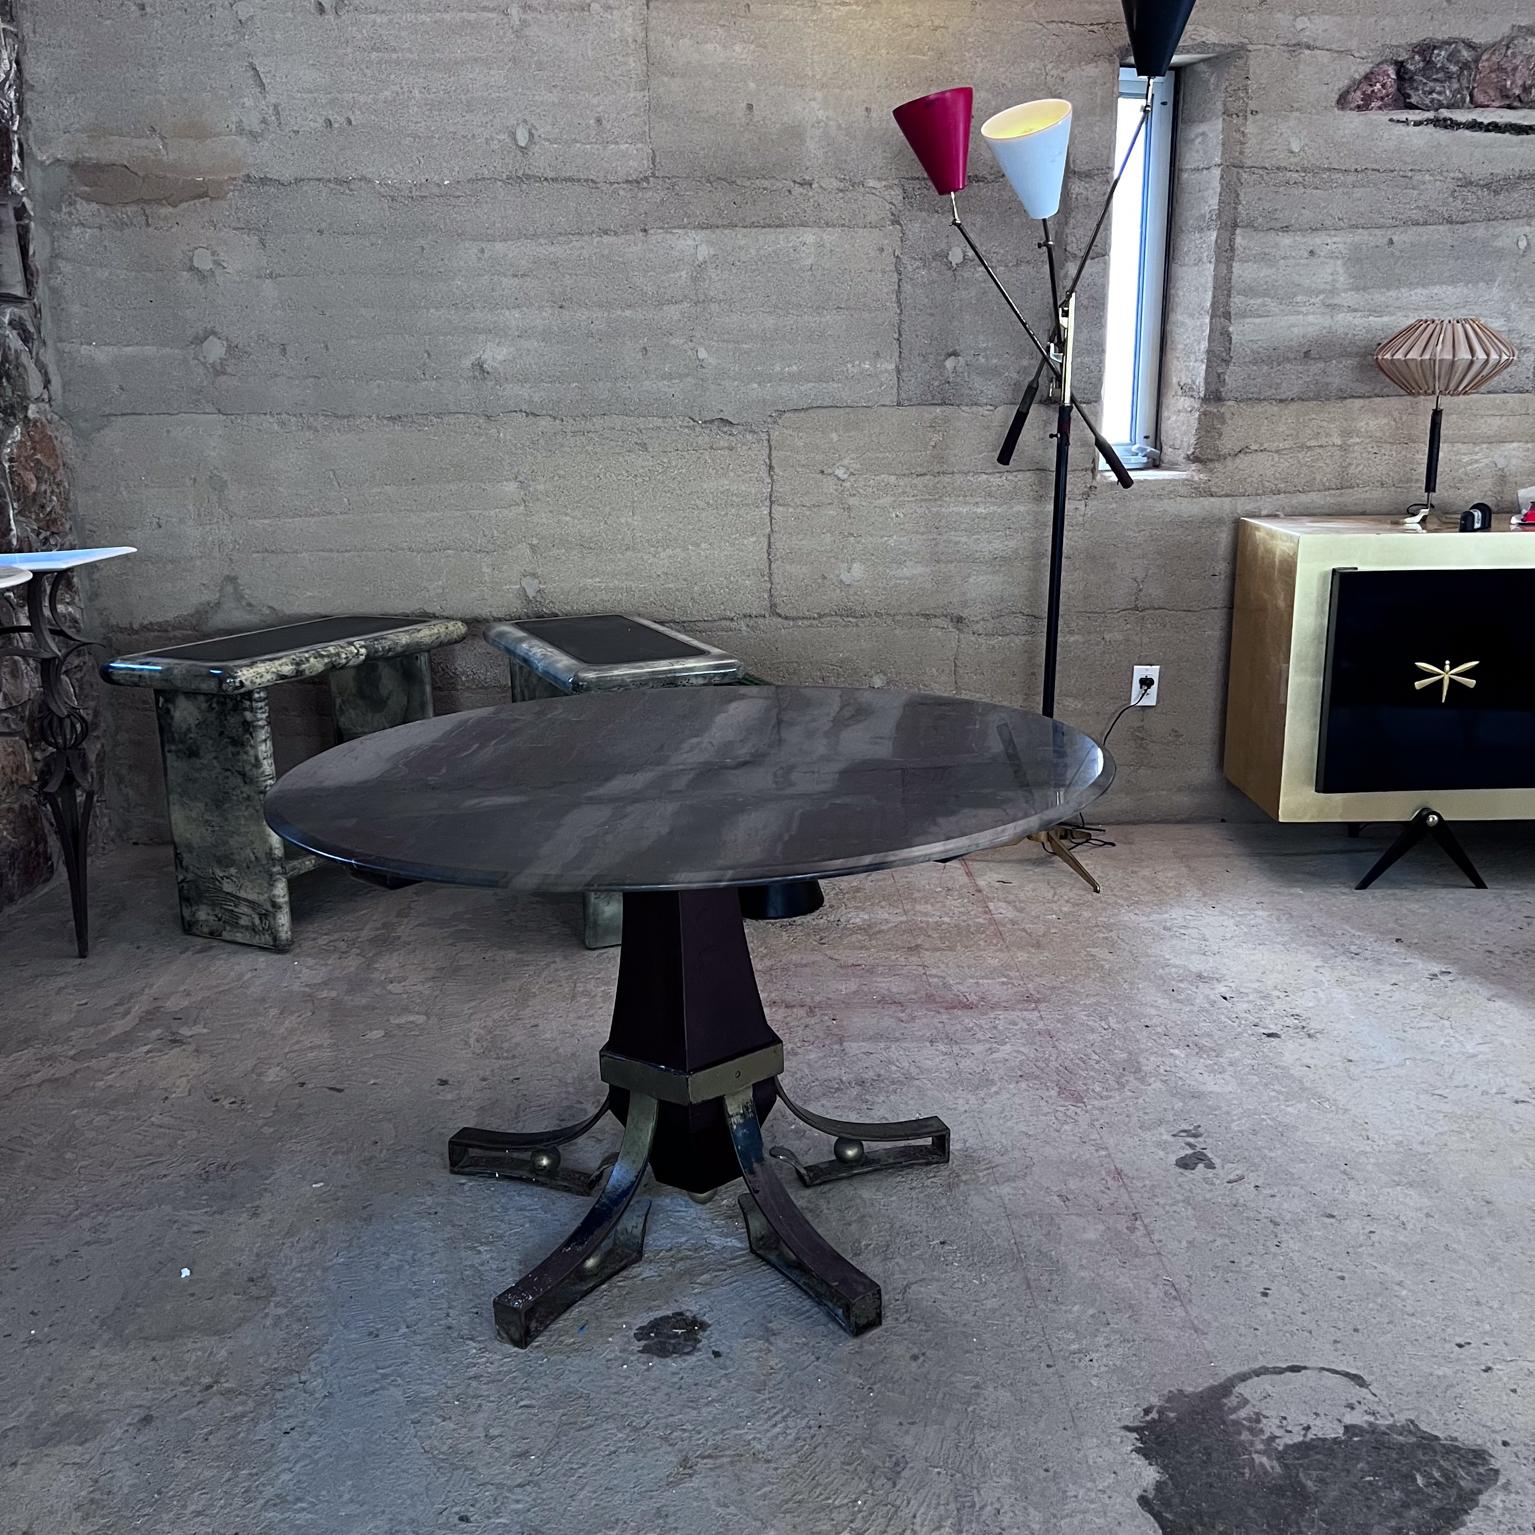 1950s Arturo Pani Forged Iron Mahogany Marble Dining Table Mexico City For Sale 7